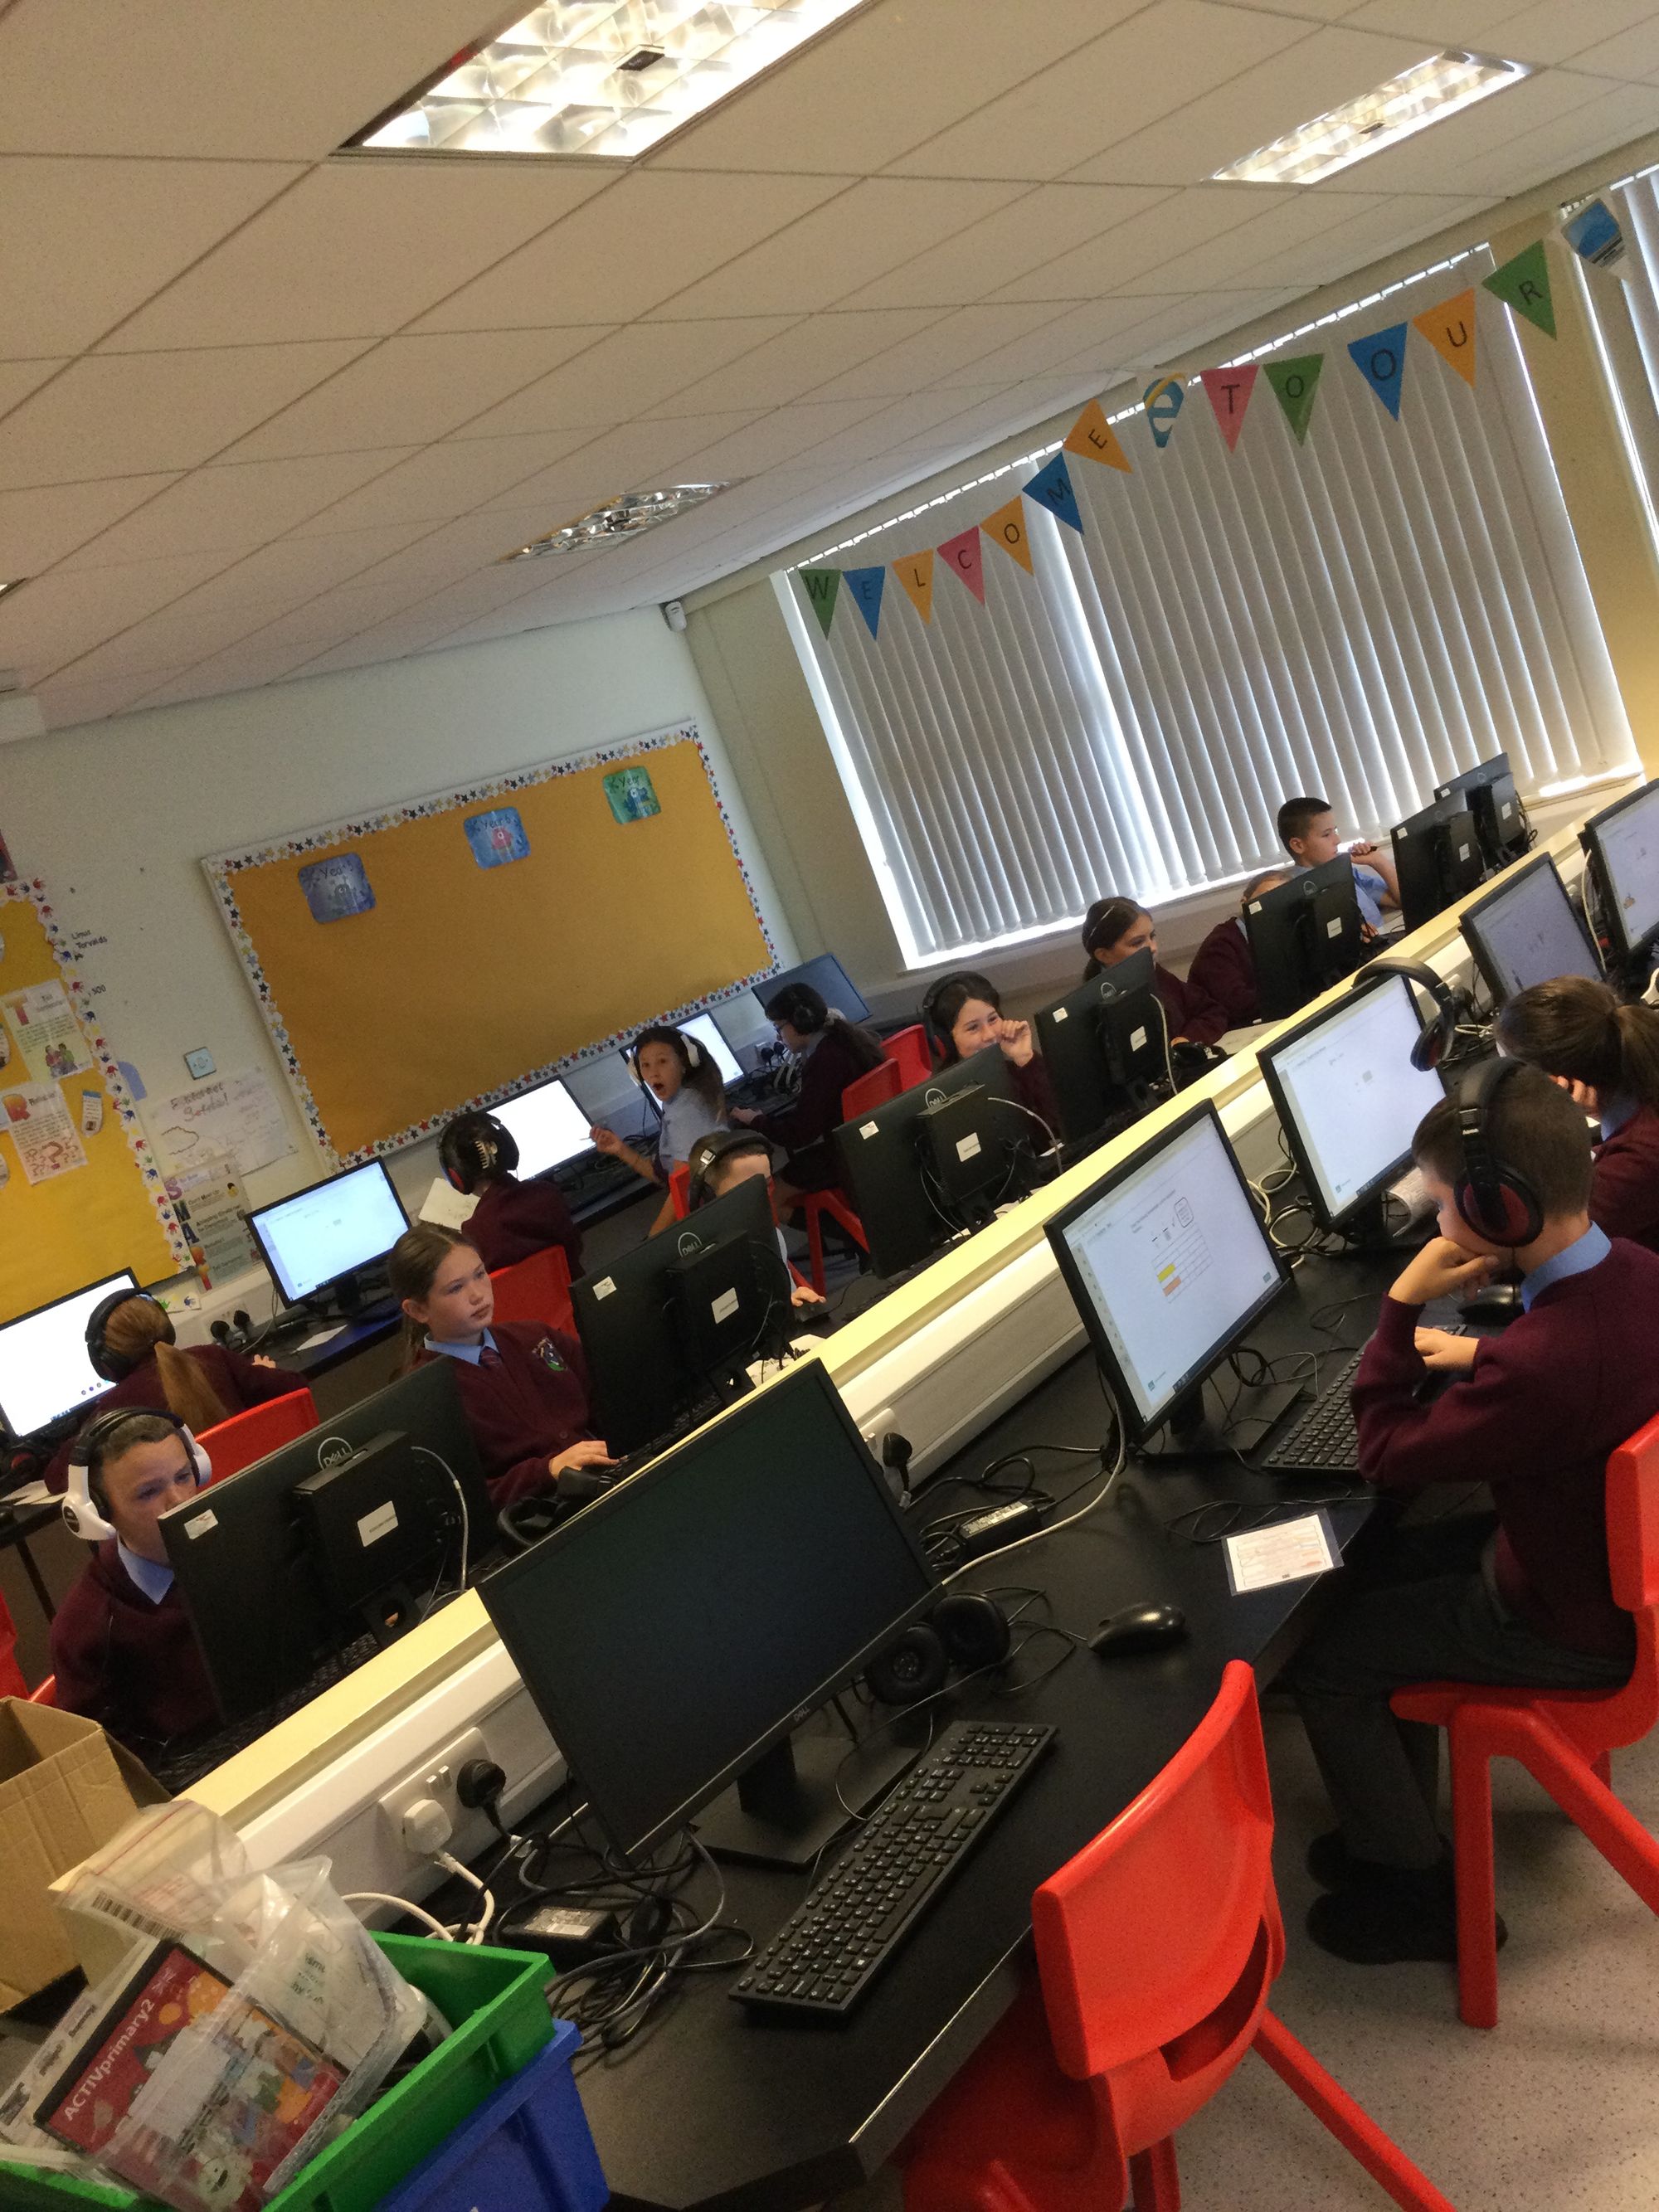 Year 7B working on their fractions this week, in the ICT suite. Well done boys and girls